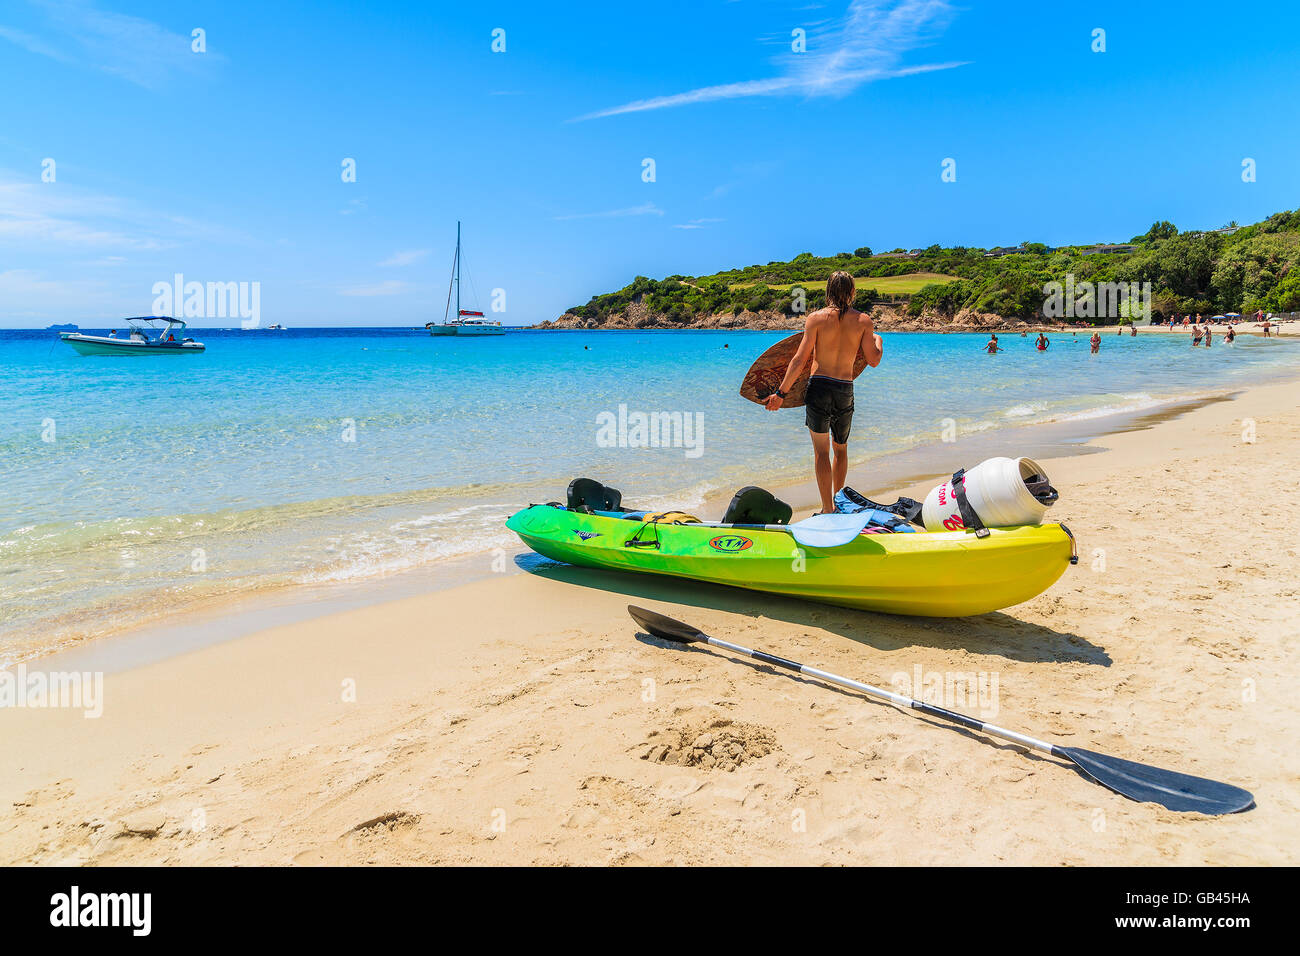 CORSICA ISLAND, FRANCE - JUN 25, 2015: young man standing by kayak and preparing for surfing on sandy Grande Sperone beach, Cors Stock Photo